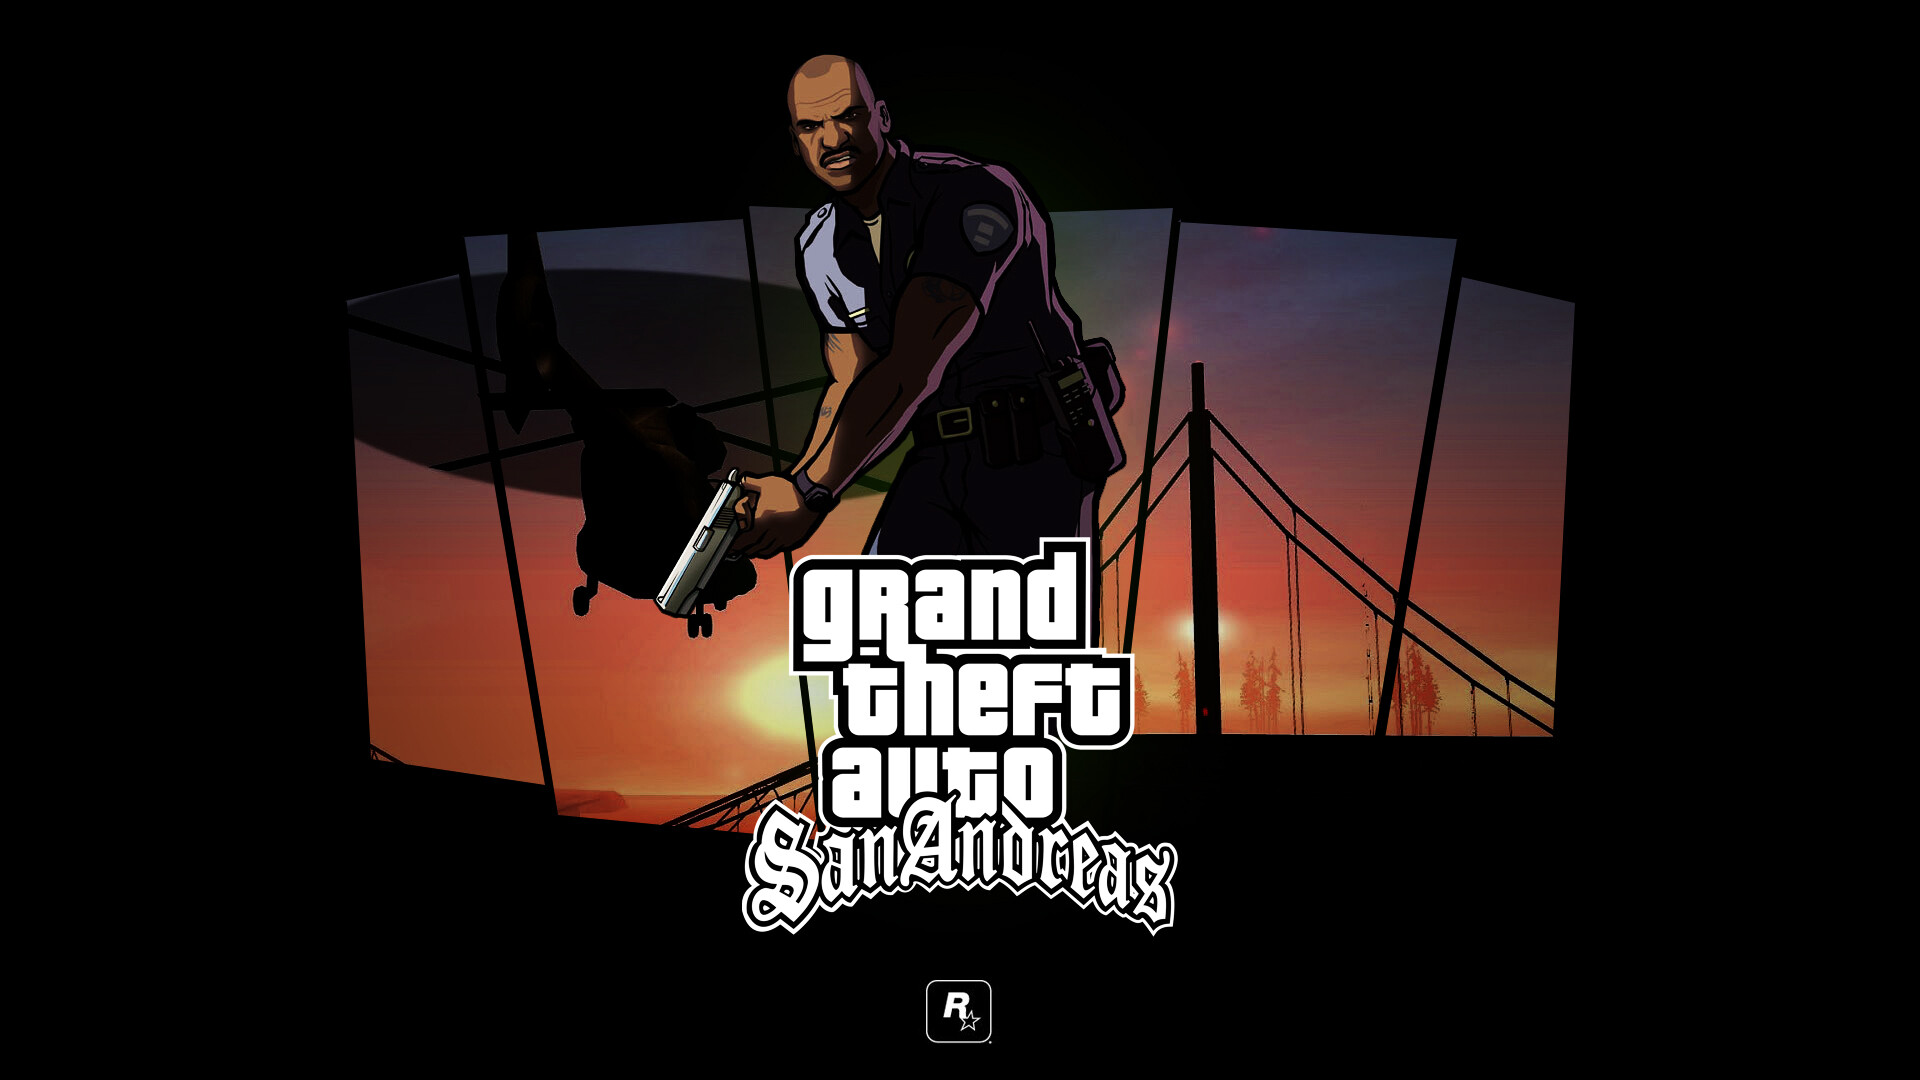 Grand Theft Auto: San Andreas: An action game developed by Rockstar Games. 1920x1080 Full HD Wallpaper.